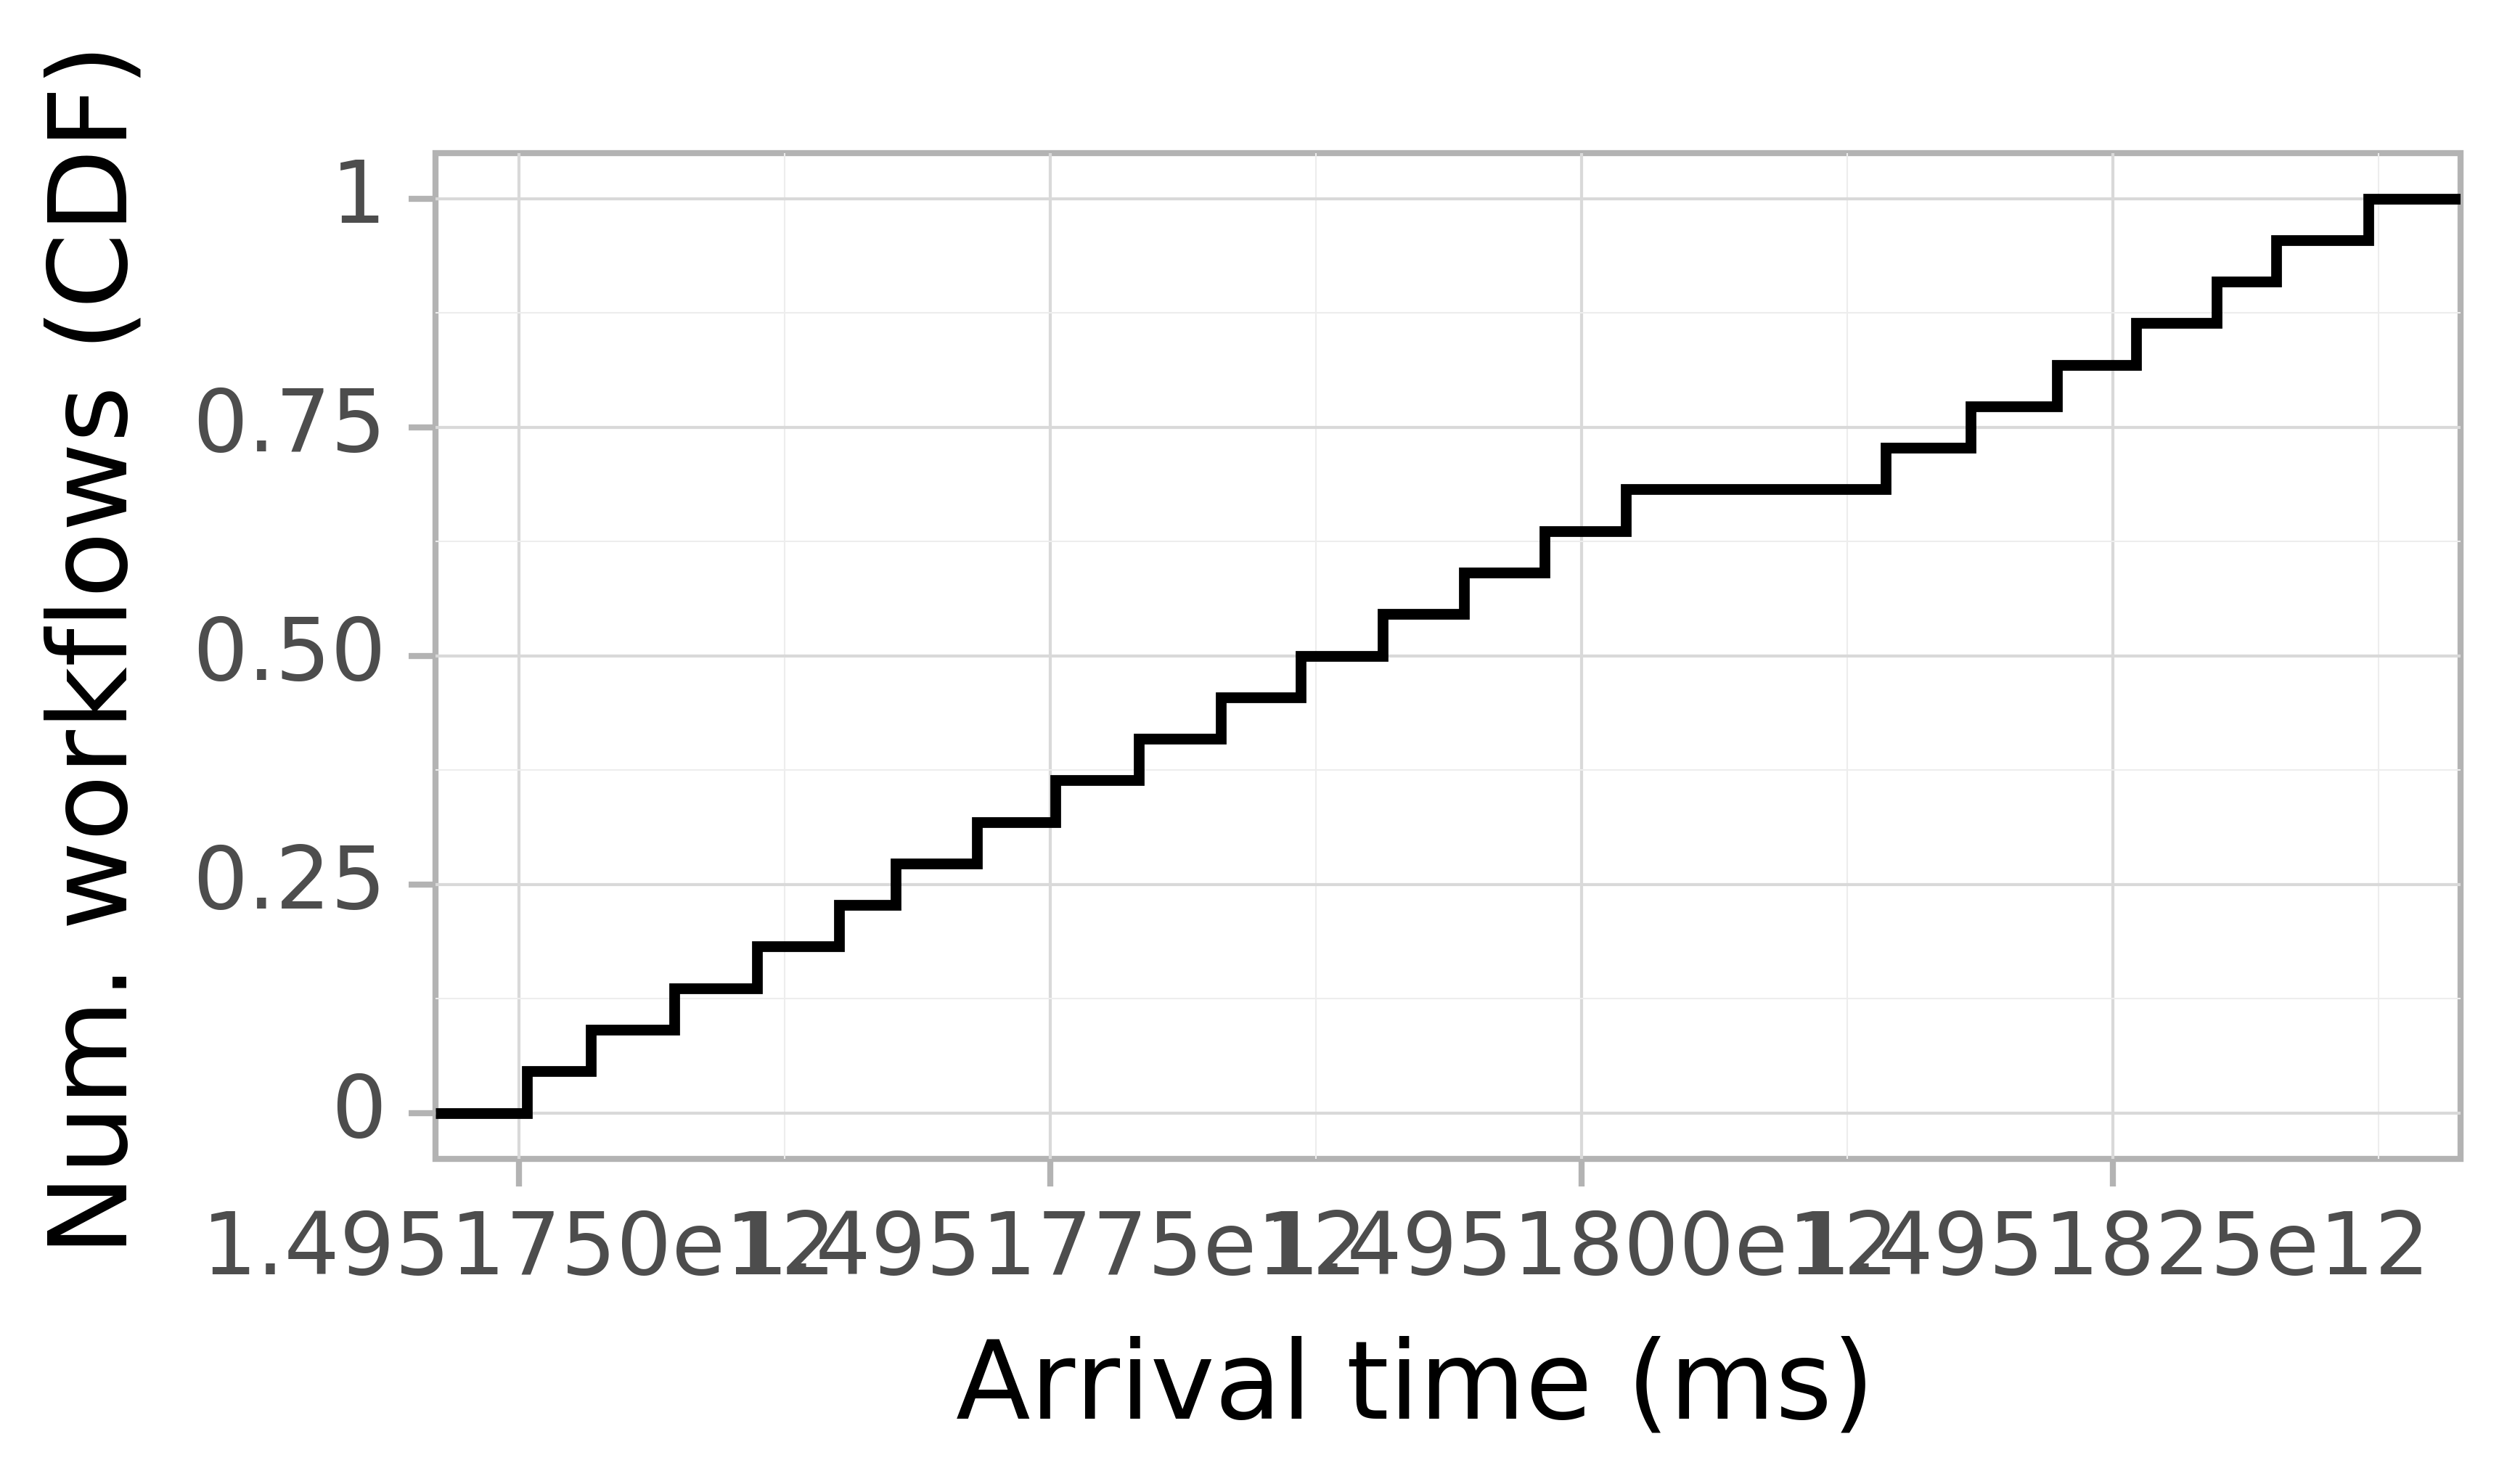 Job arrival CDF graph for the askalon-new_ee64 trace.